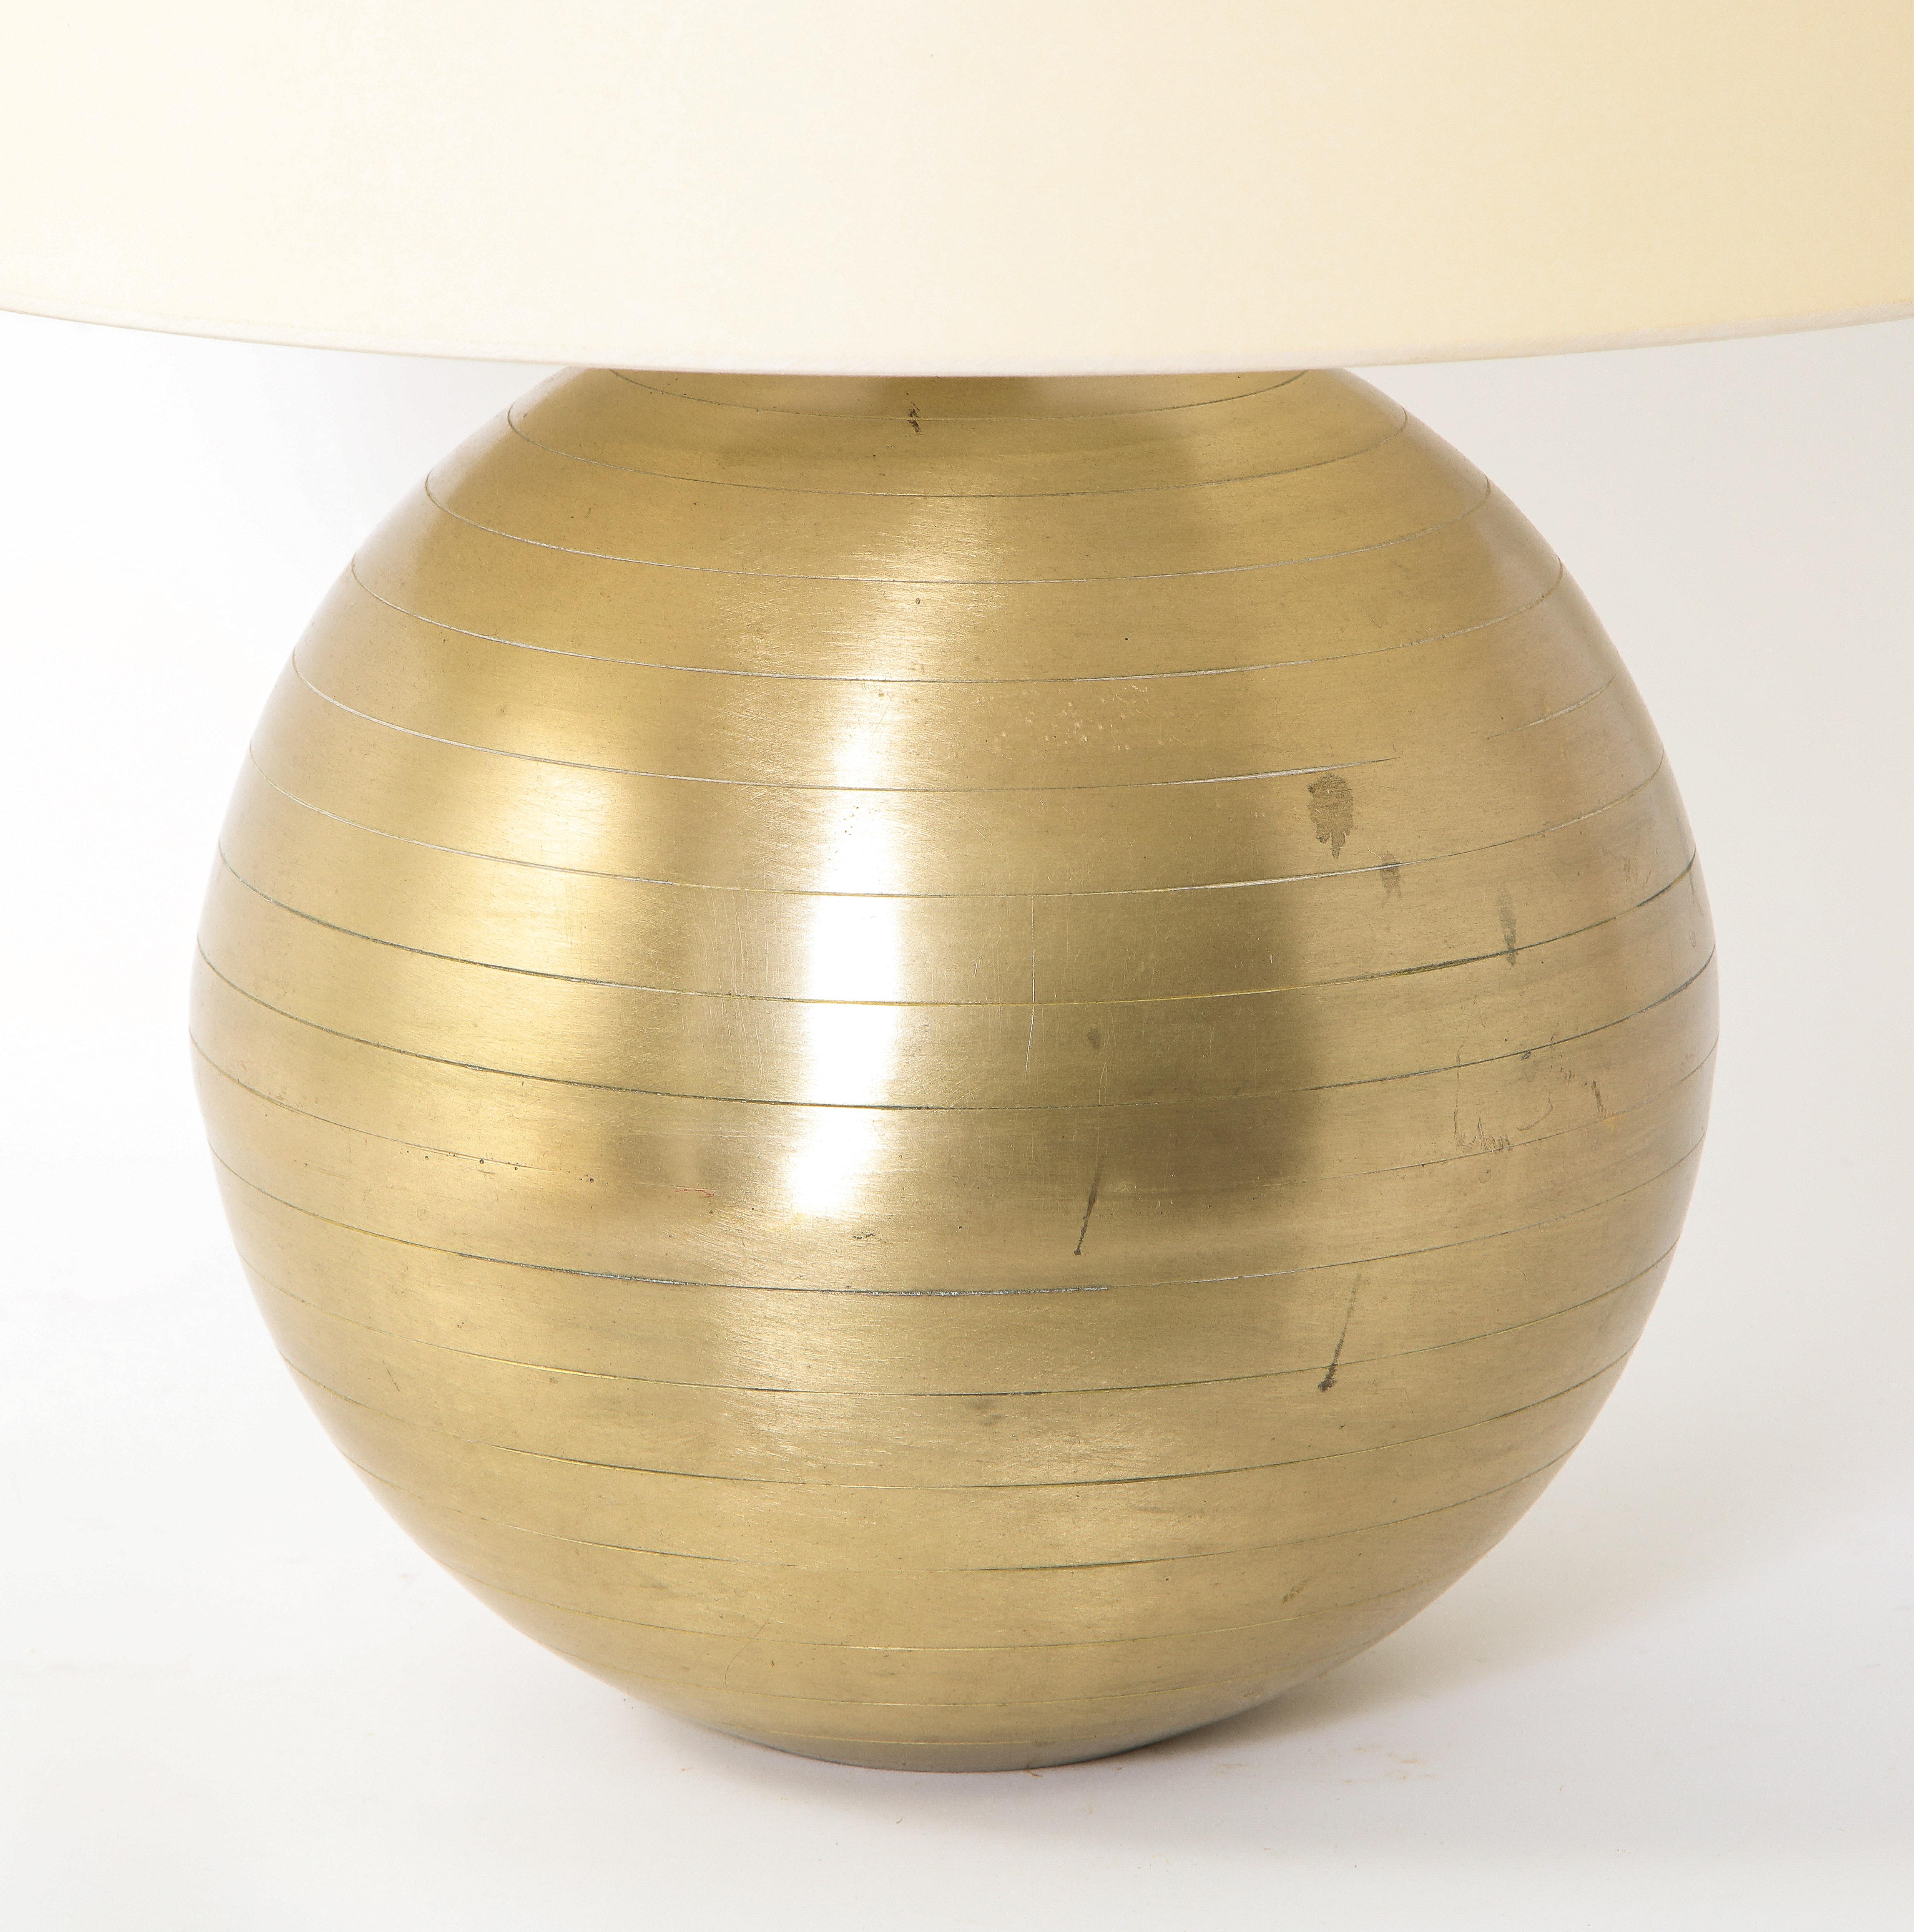 Engraved brass spherical lamp with thick walls, France, 1970s. Rewired. Shade not included.